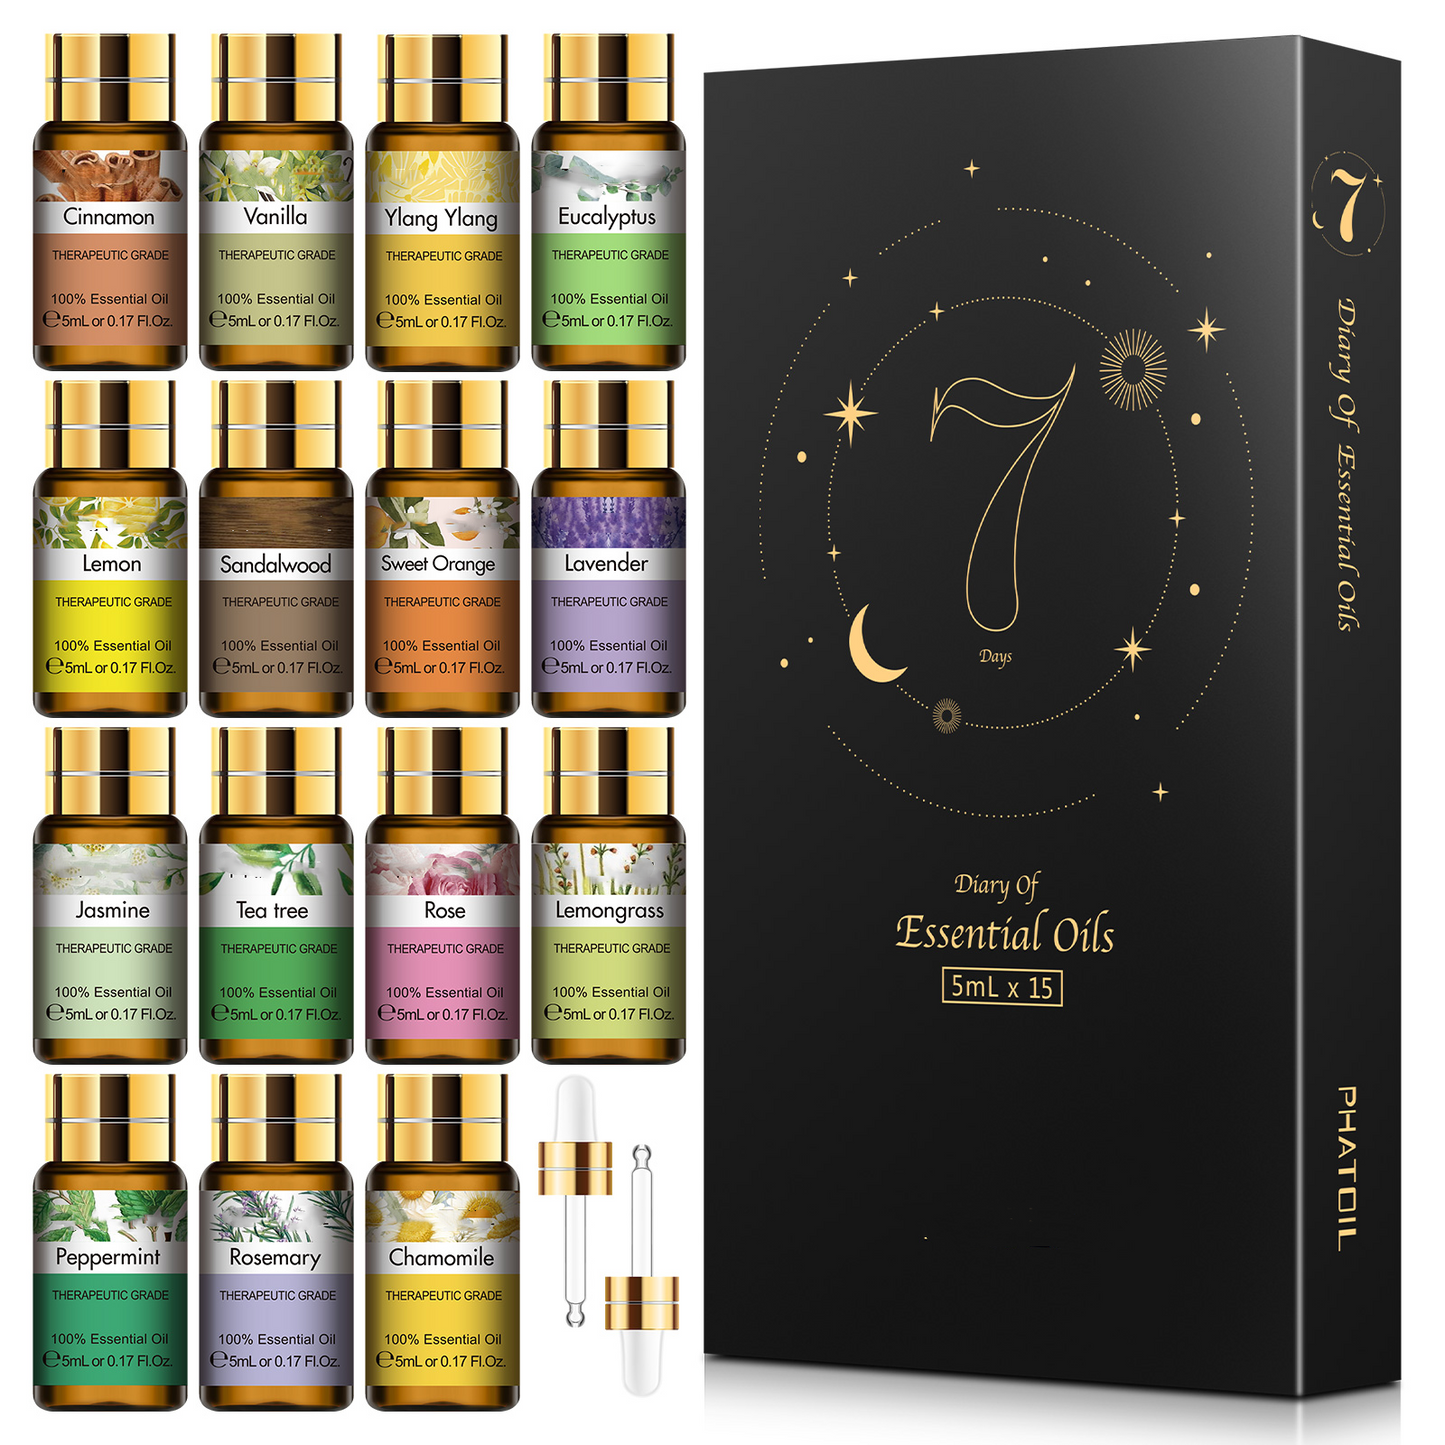 Feng Shui Xing essential oil, essential oils, aromatherapy, home fragrance, scents